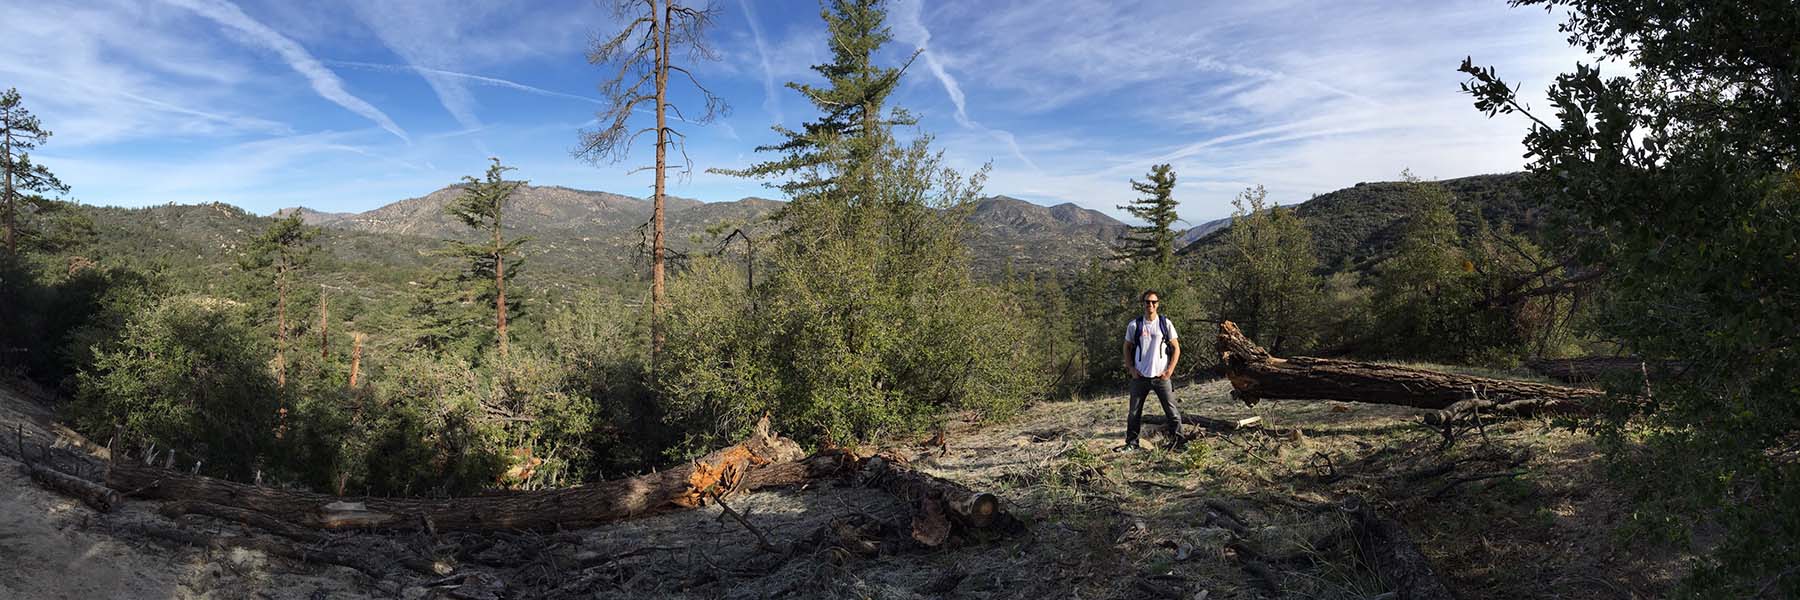 Rich Phillips stands at the top of a mountain with more mountains, pine forests, and blue sky behind him.